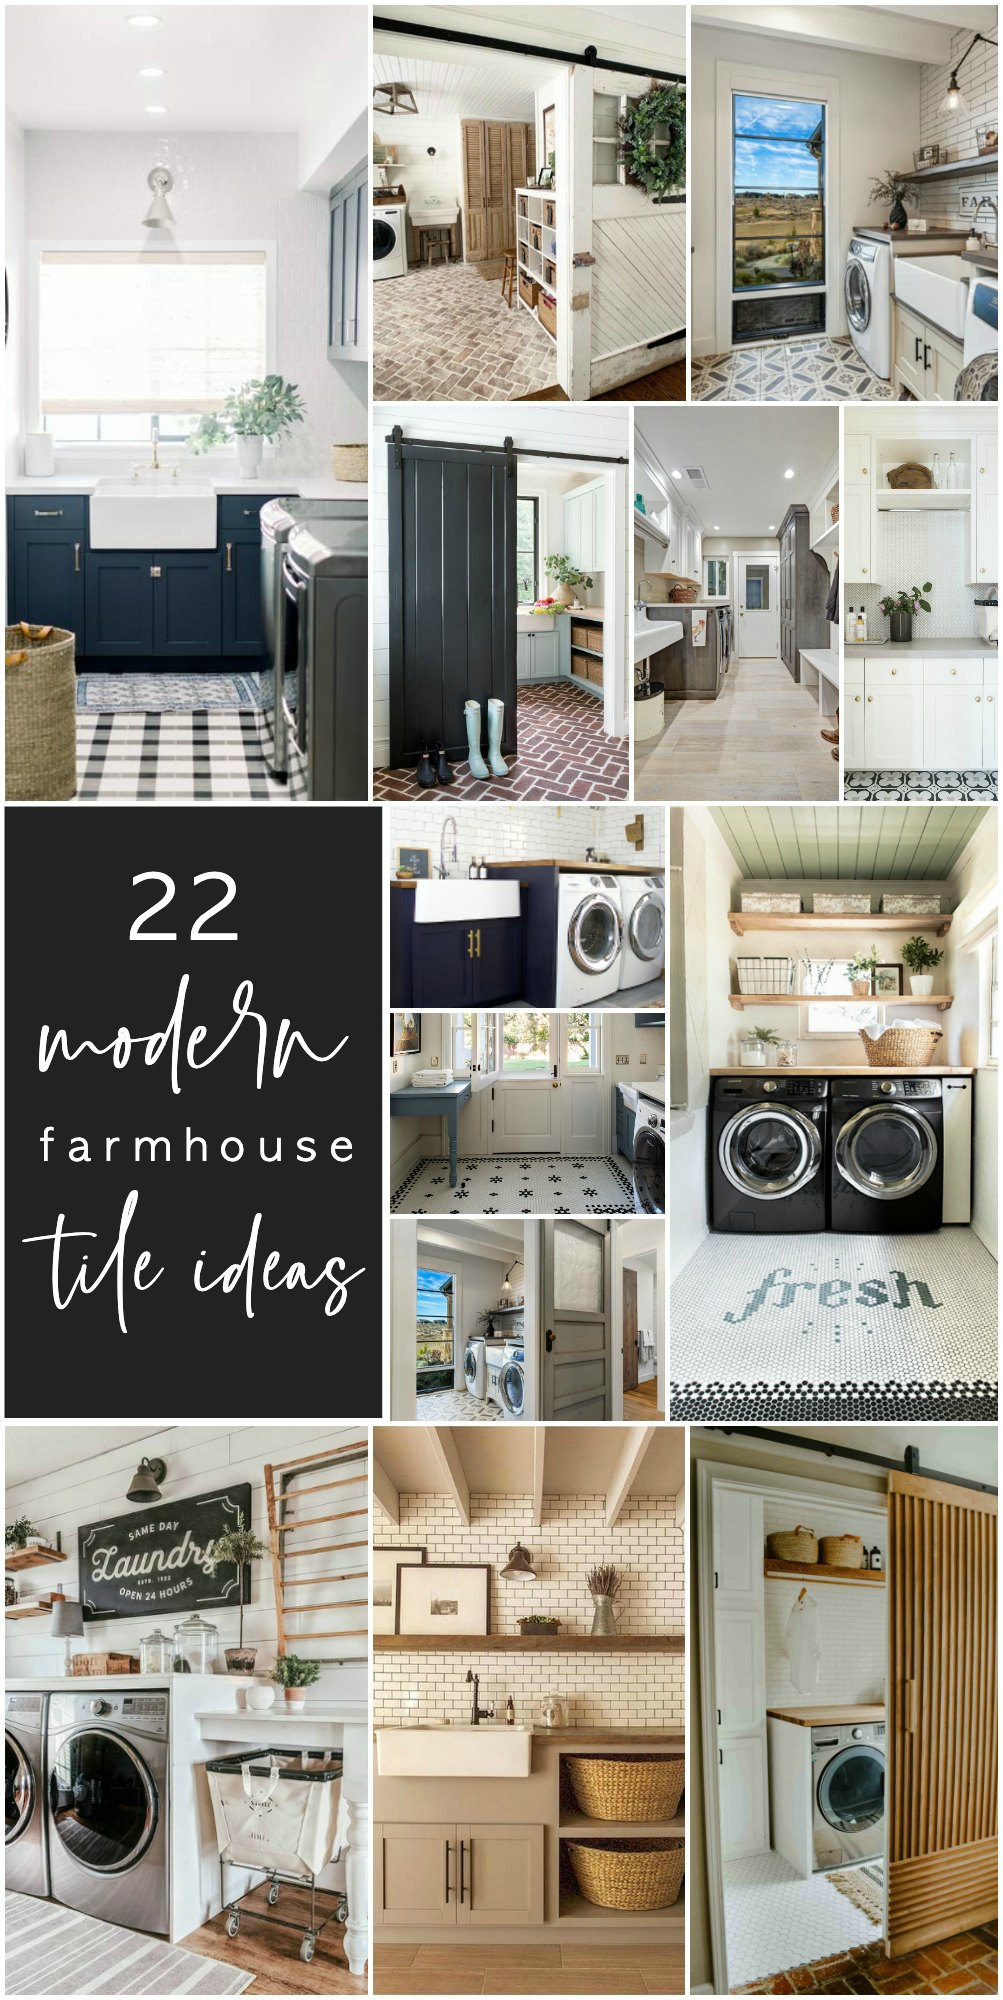 22 Gorgeous Tile Ideas for Modern Farmhouse and Cottage Laundry Rooms. Make your laundry room a showpiece in your home by adding some pretty tile and shelves!